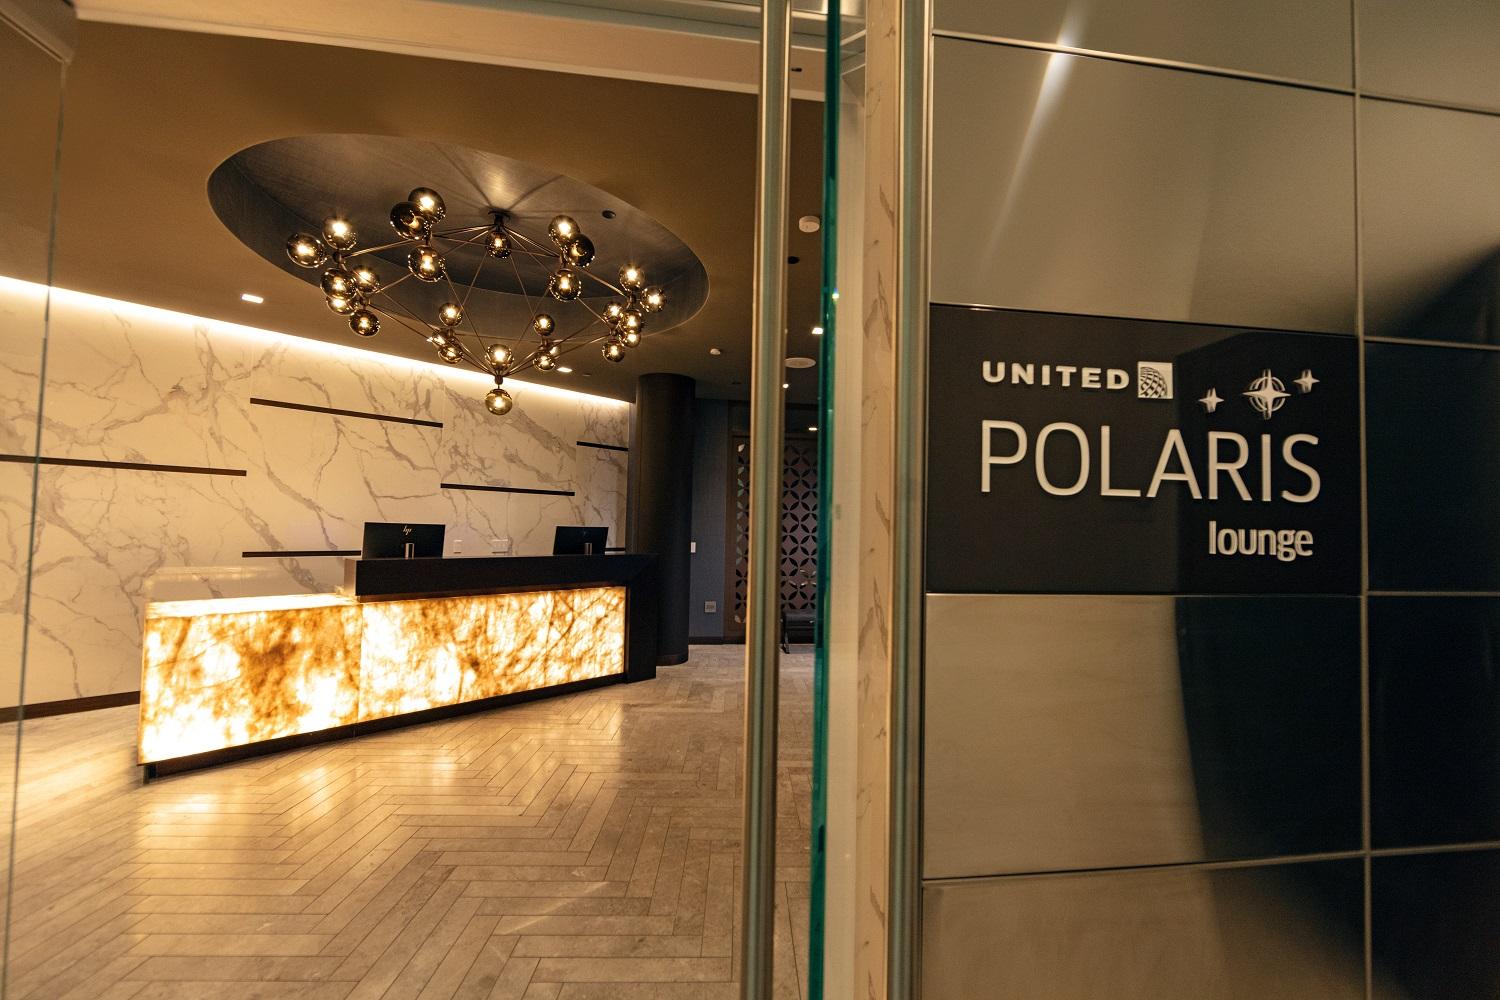 United Airlines Polaris Lounge Logo - Now Open: United Airlines Polaris Lounge LAX! - SamChui.com